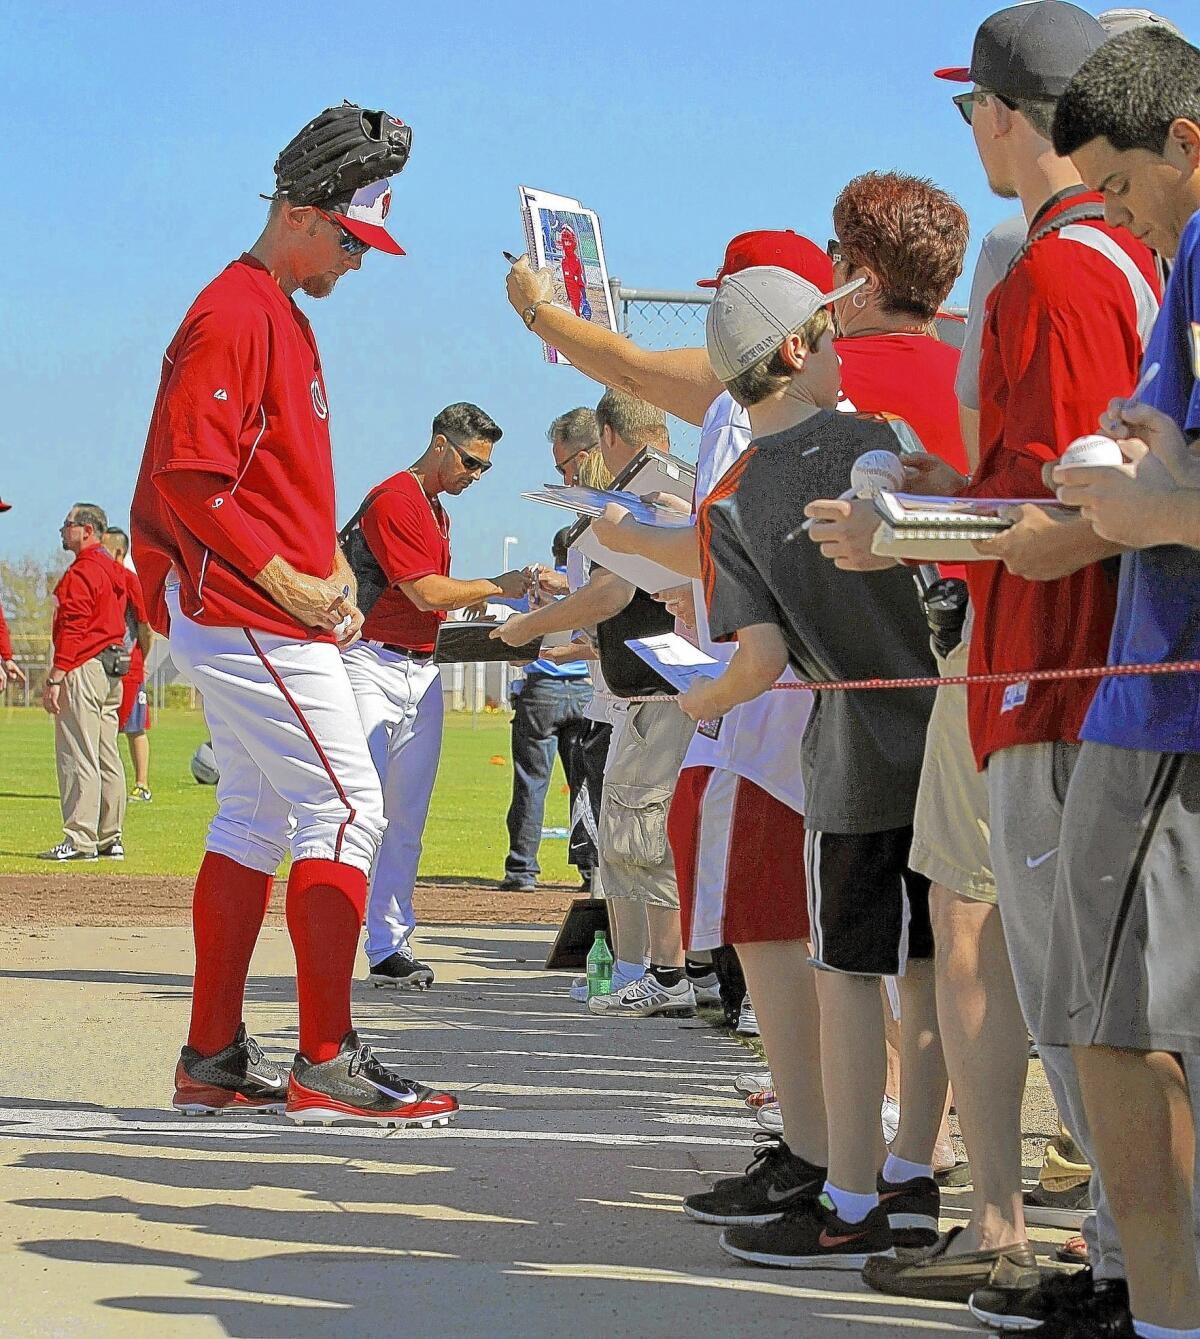 Stephen Strasburg, left, and Nationals teammate Gio Gonzalez in 2014 with fans in Viera, Fla.